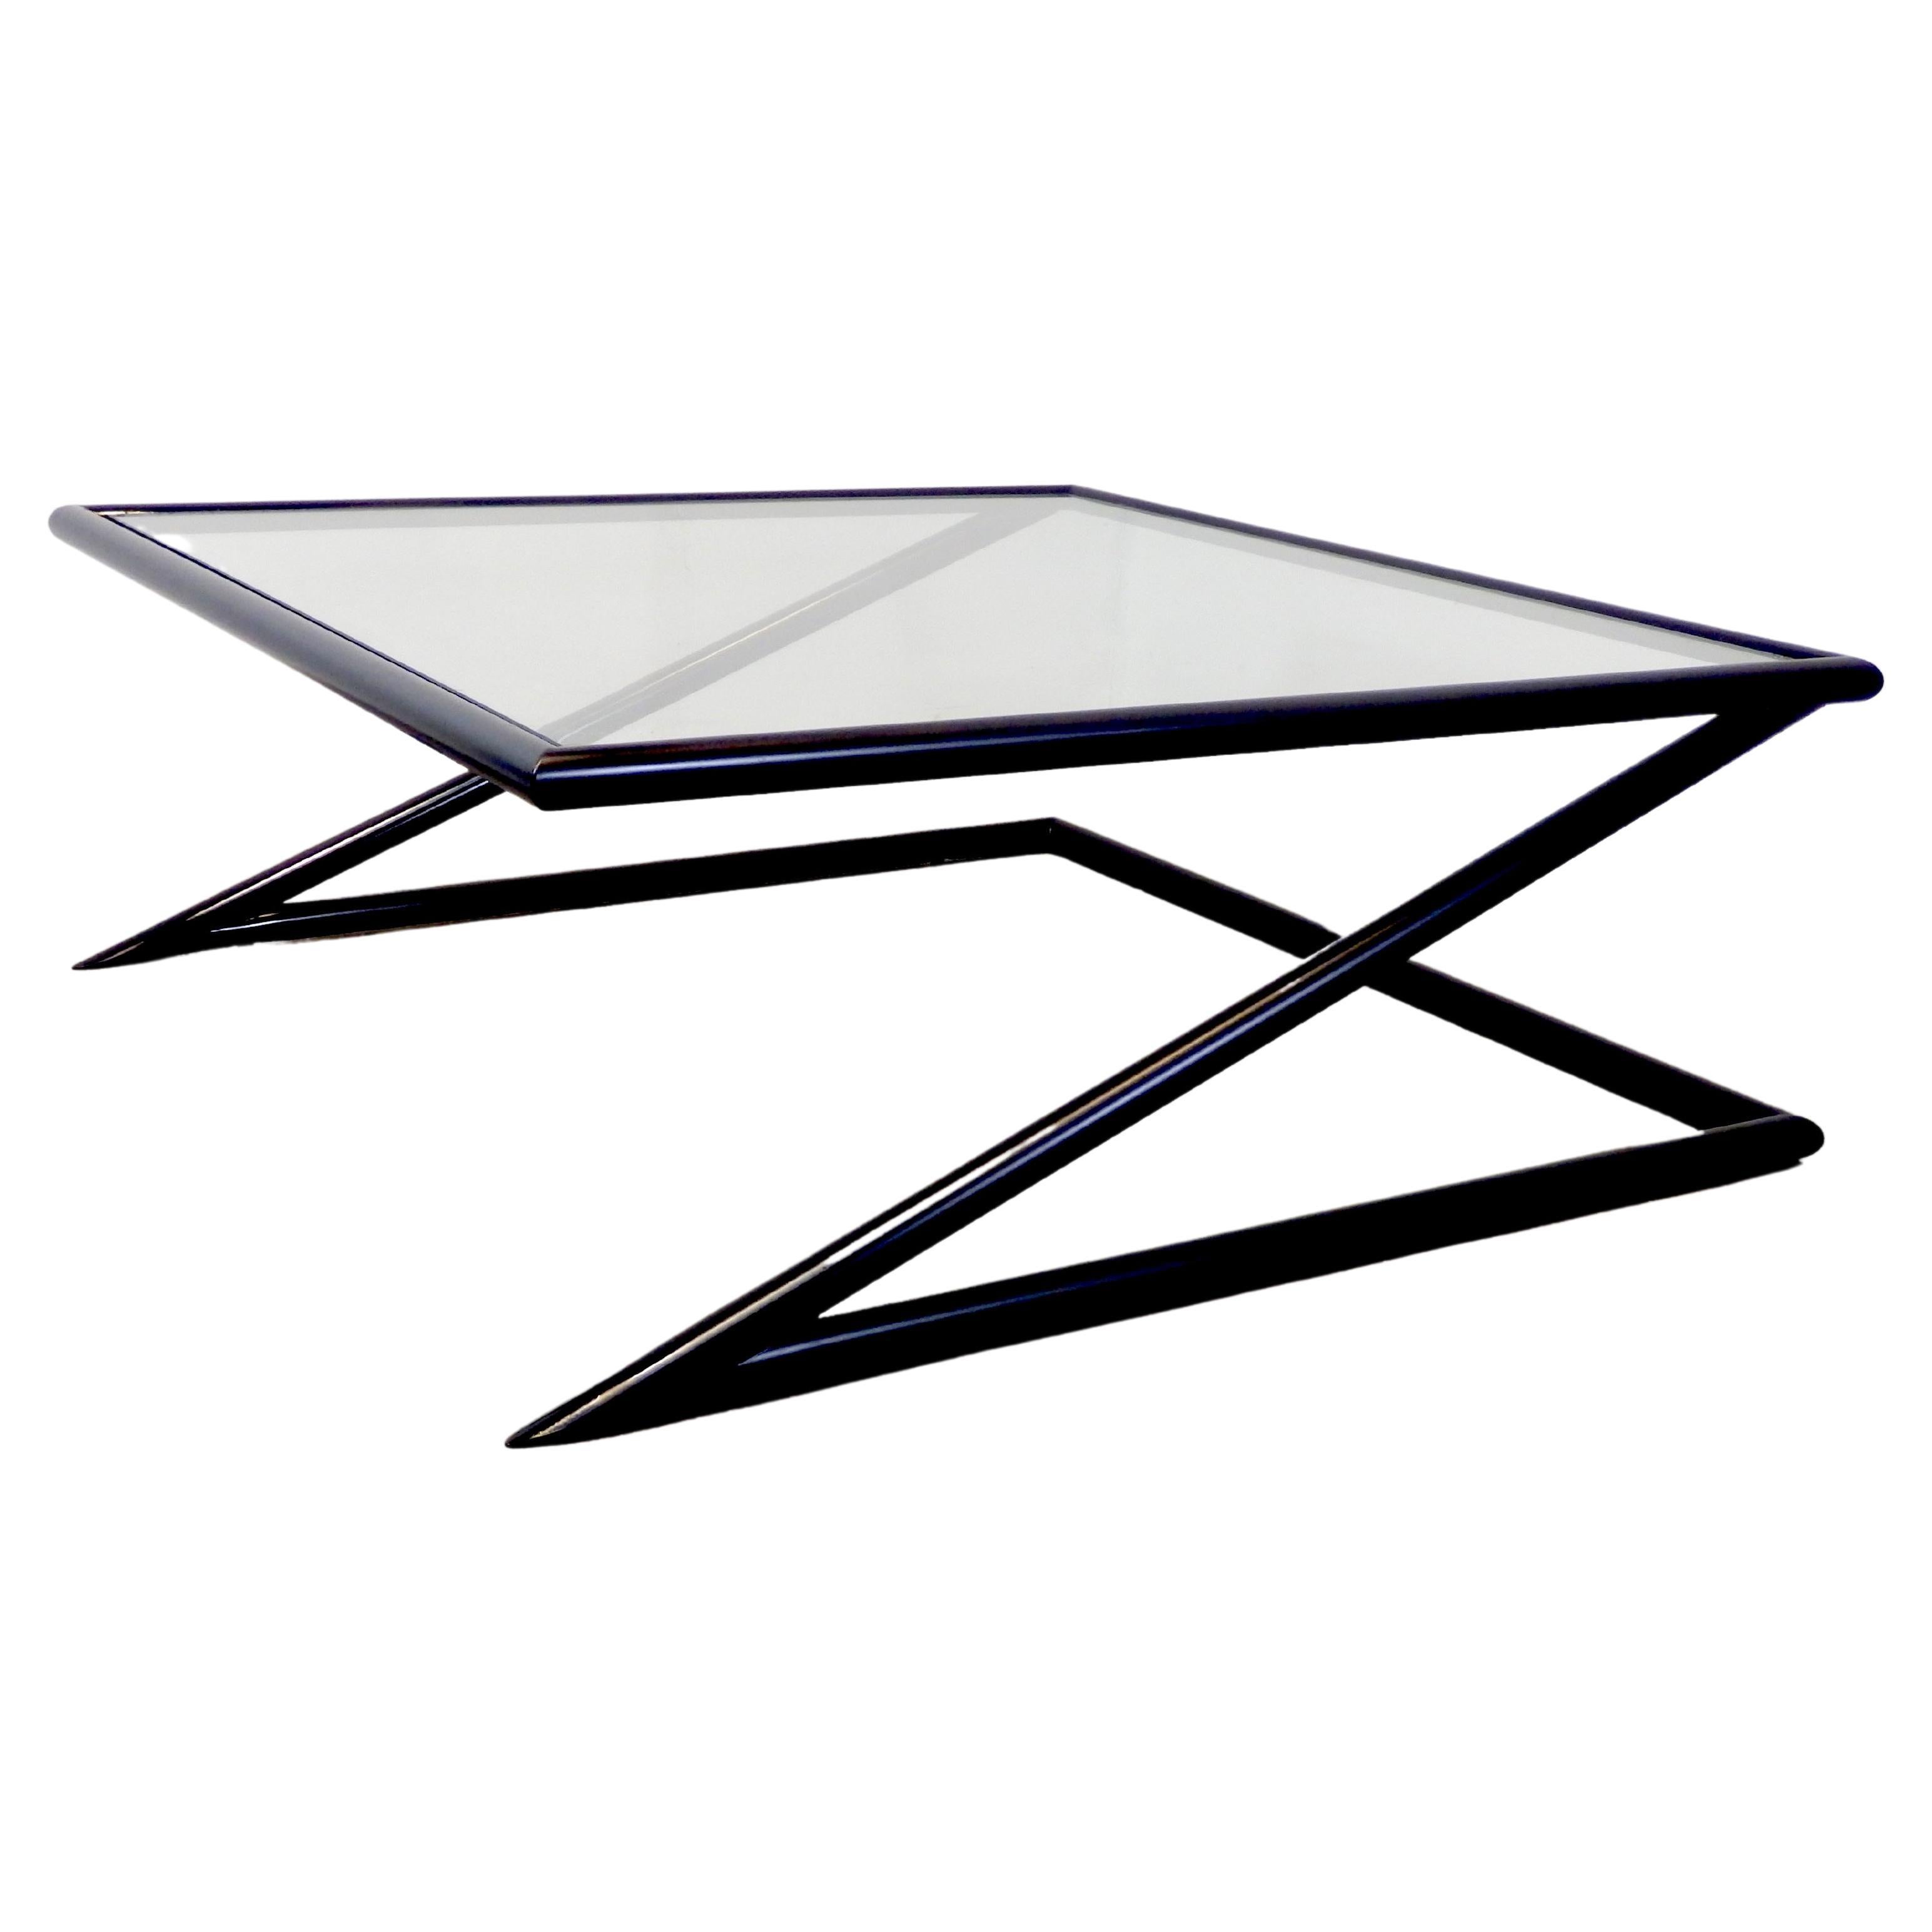 Dutch Design 'Z' Coffee Table by Harvink, 1980s